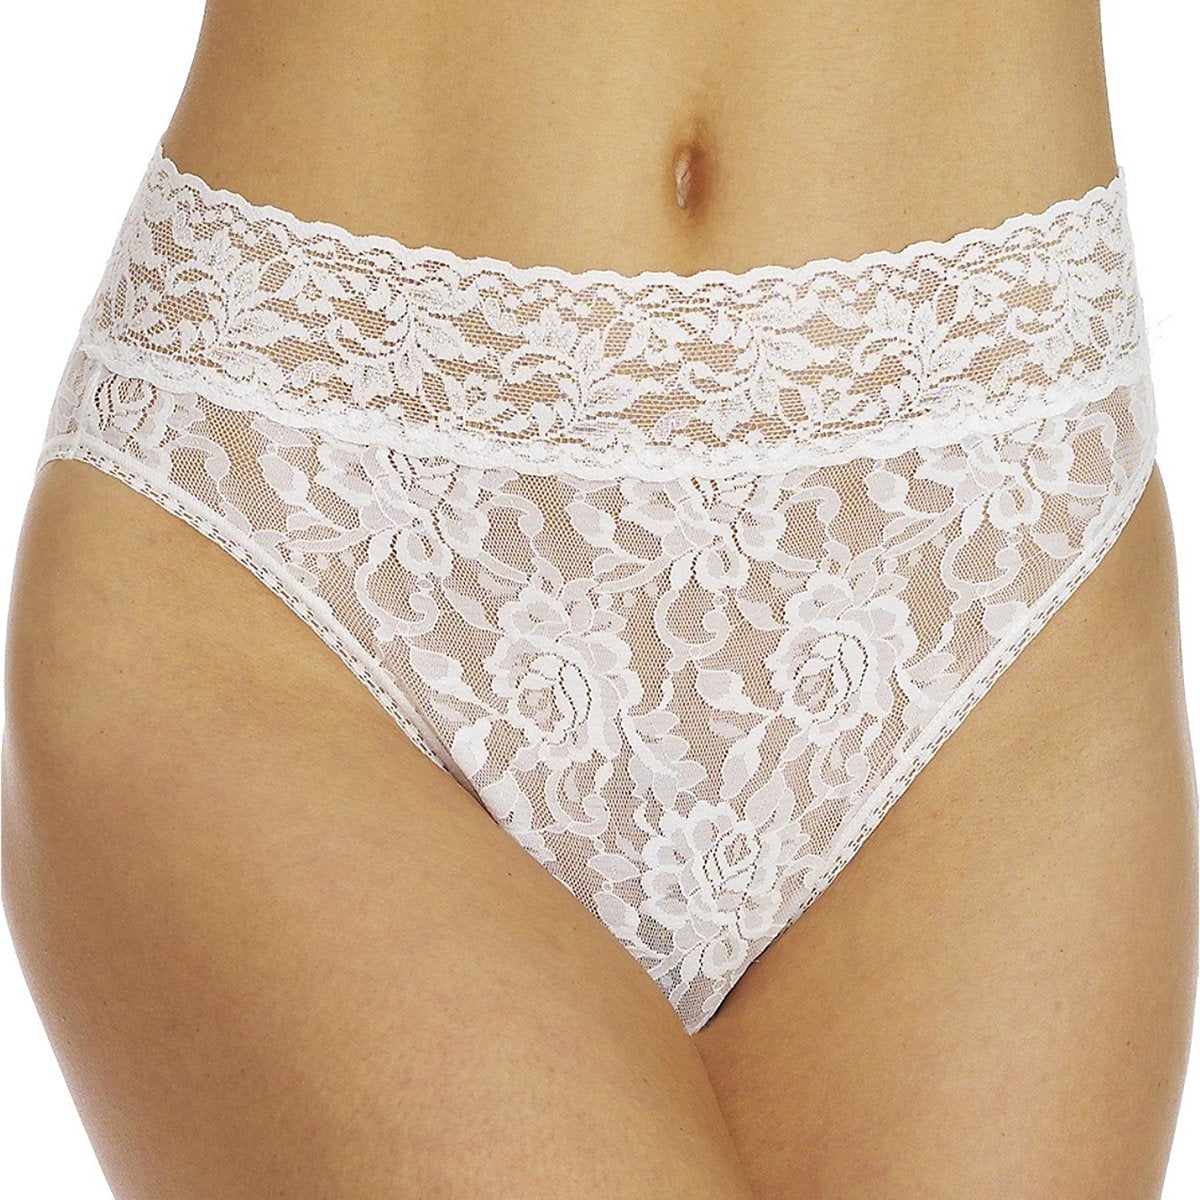 Hanky Panky 461 Signature Lace French Full Brief in White